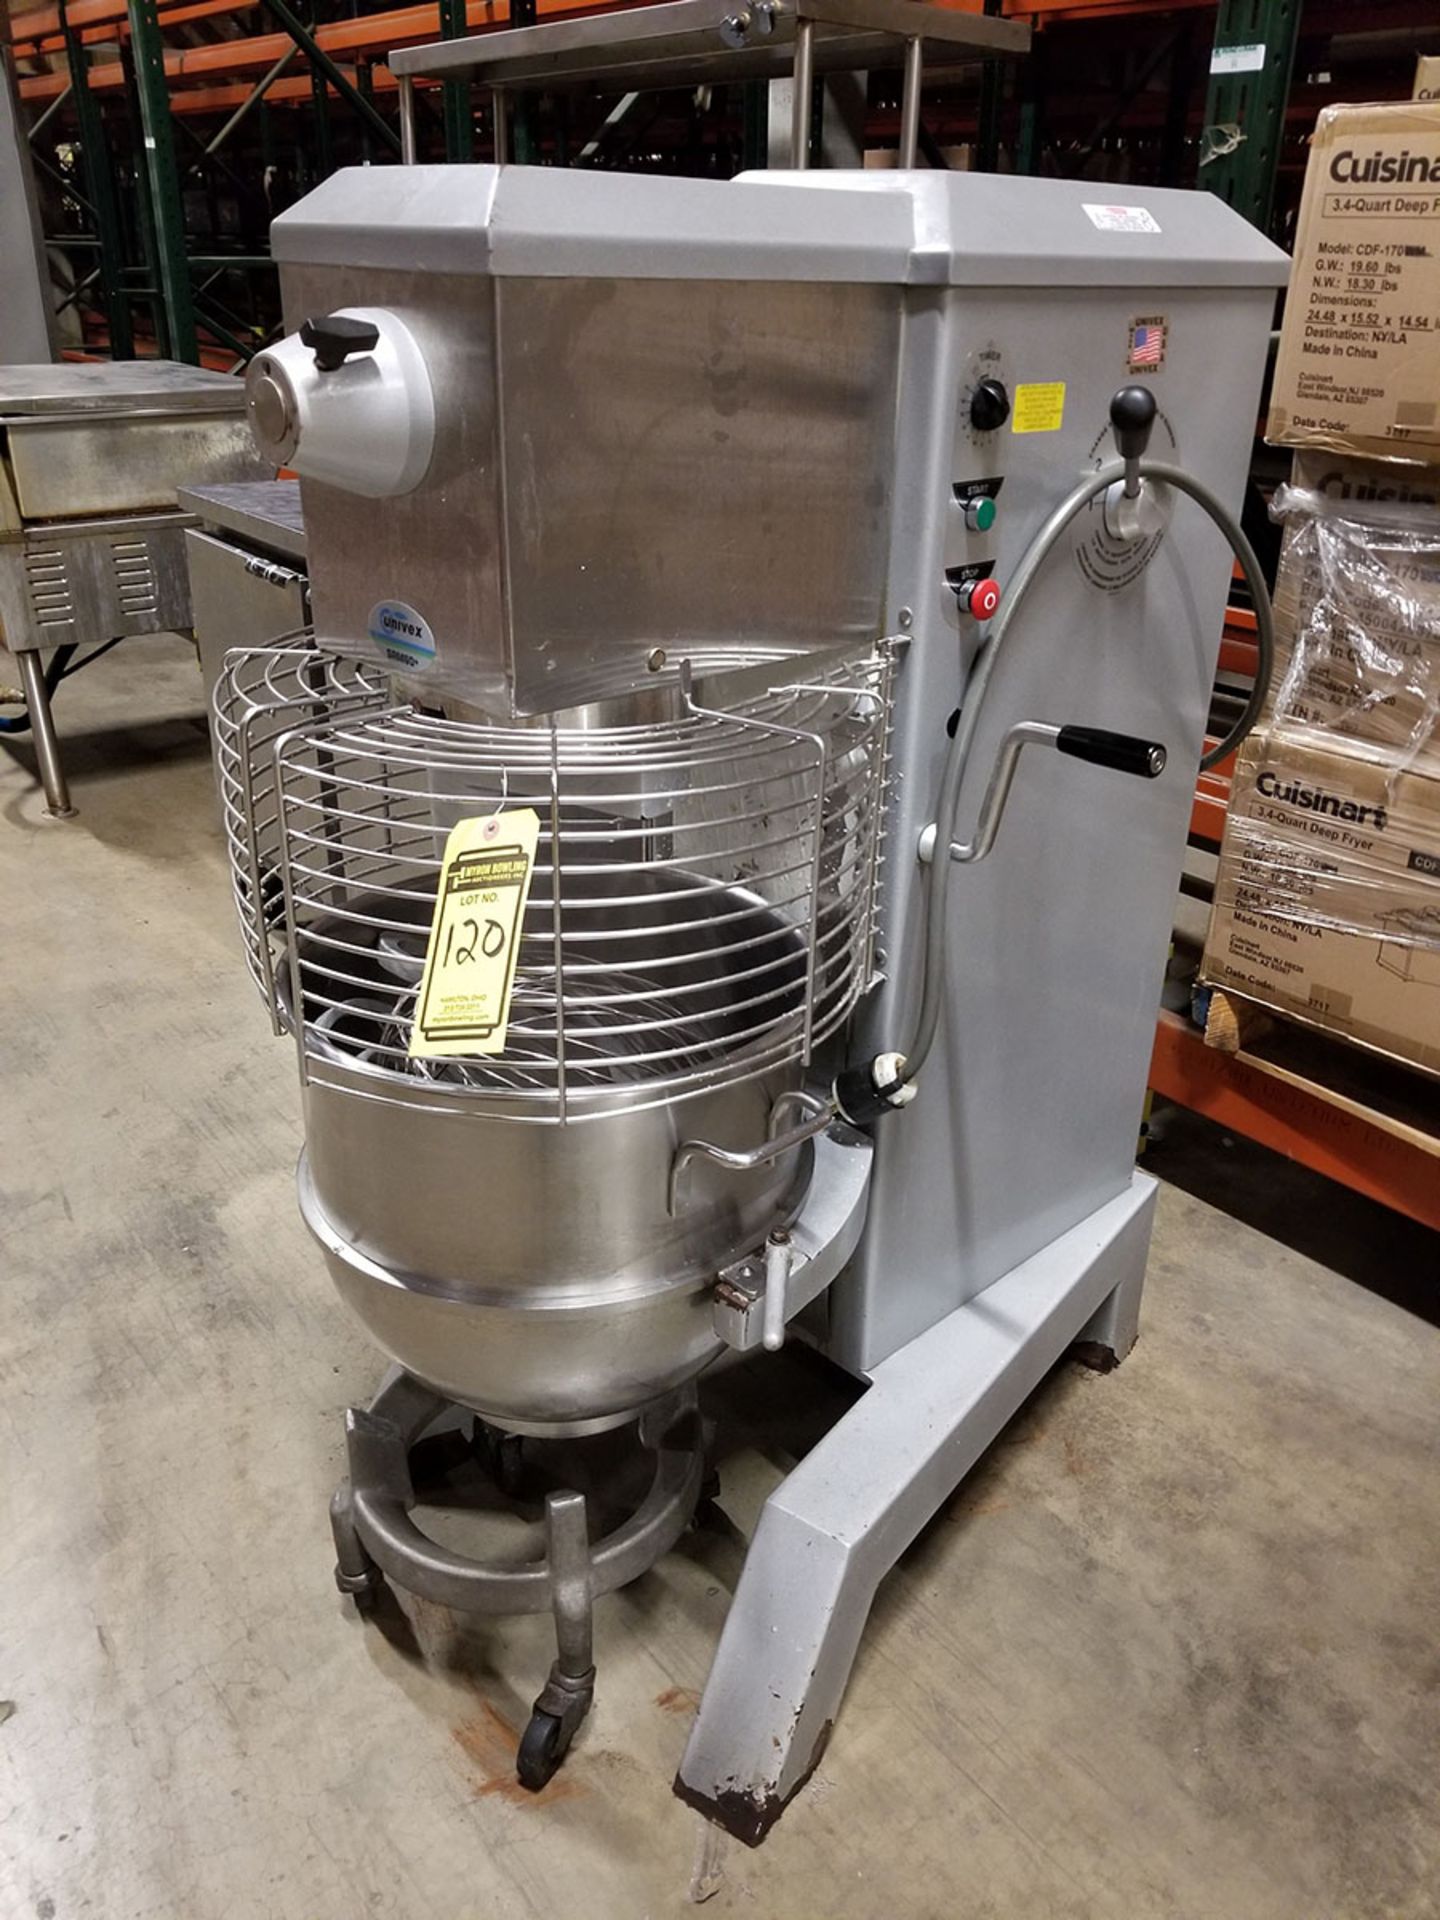 2006 UNIVEX SRM60 STAINLESS STEEL COMMERCIAL MIXER, 19’’ DIA. BOWL, TIMER, 3-PHASE, S/N M015541